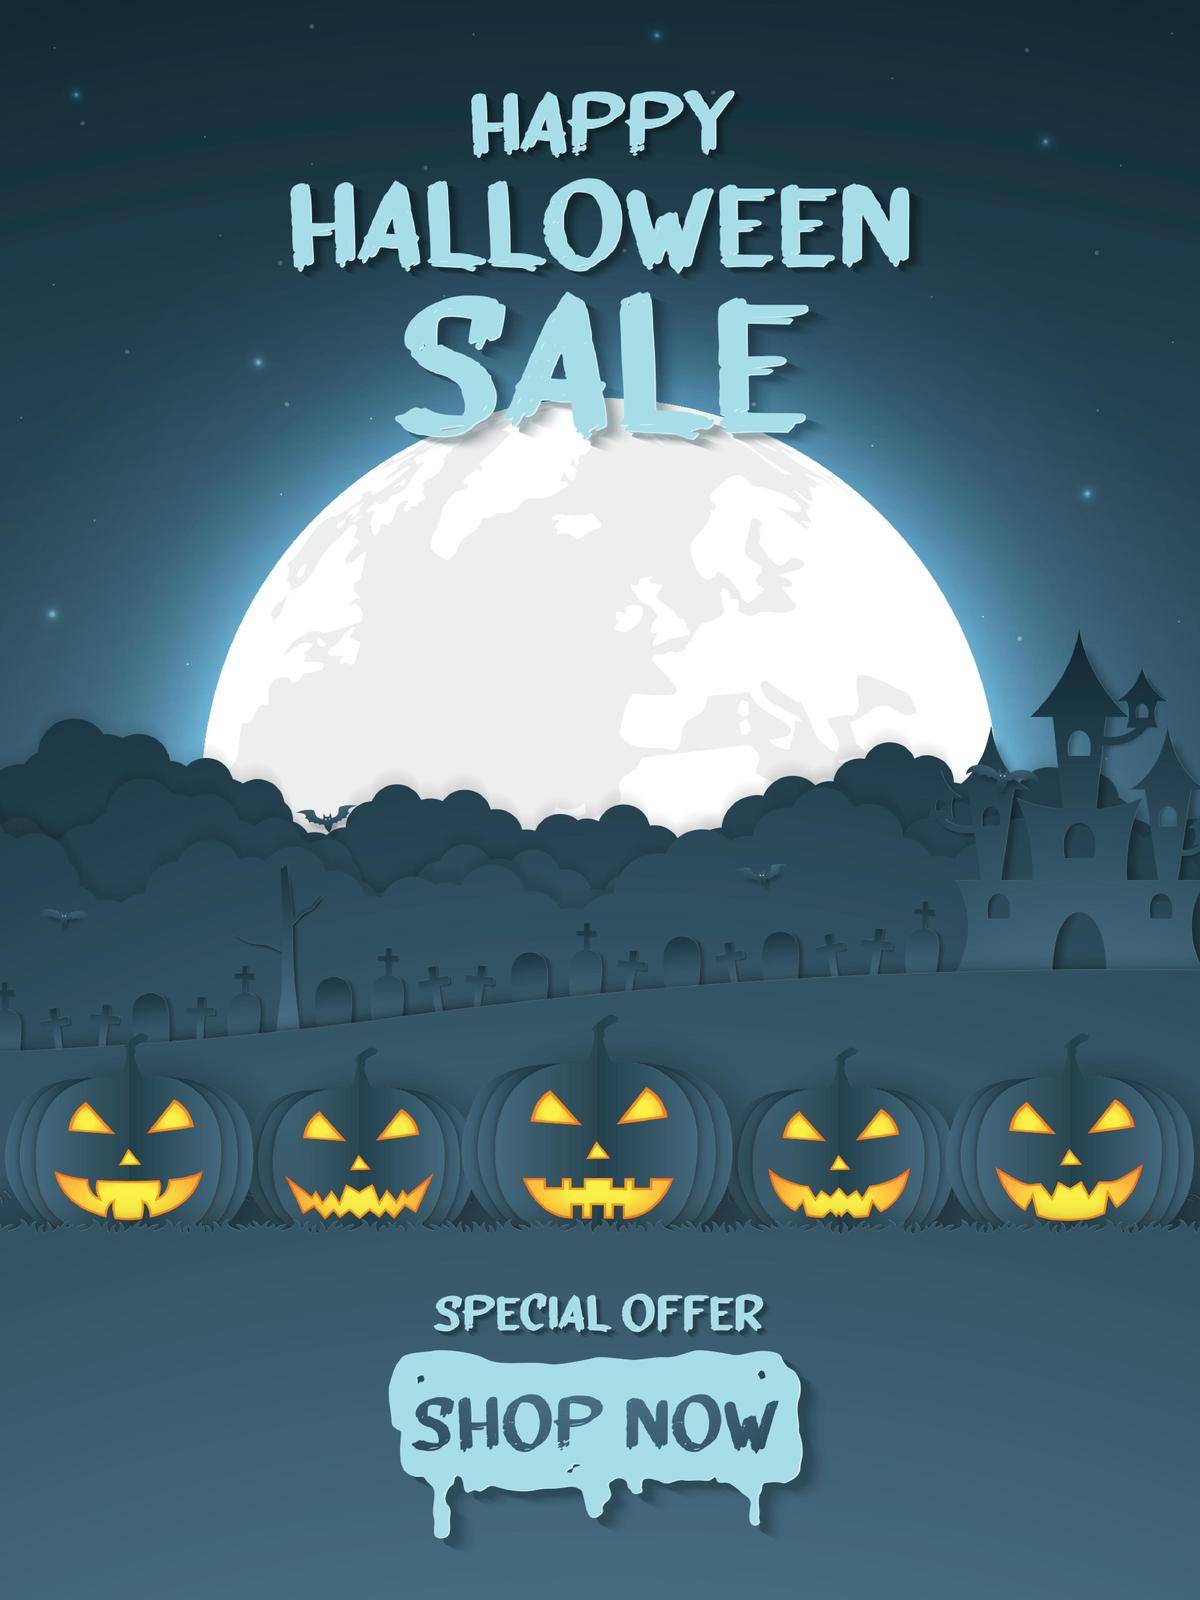 Happy Halloween sale banner, pumpkin head with castle, graveyard on the hill and full moon, paper art style by supakritleela